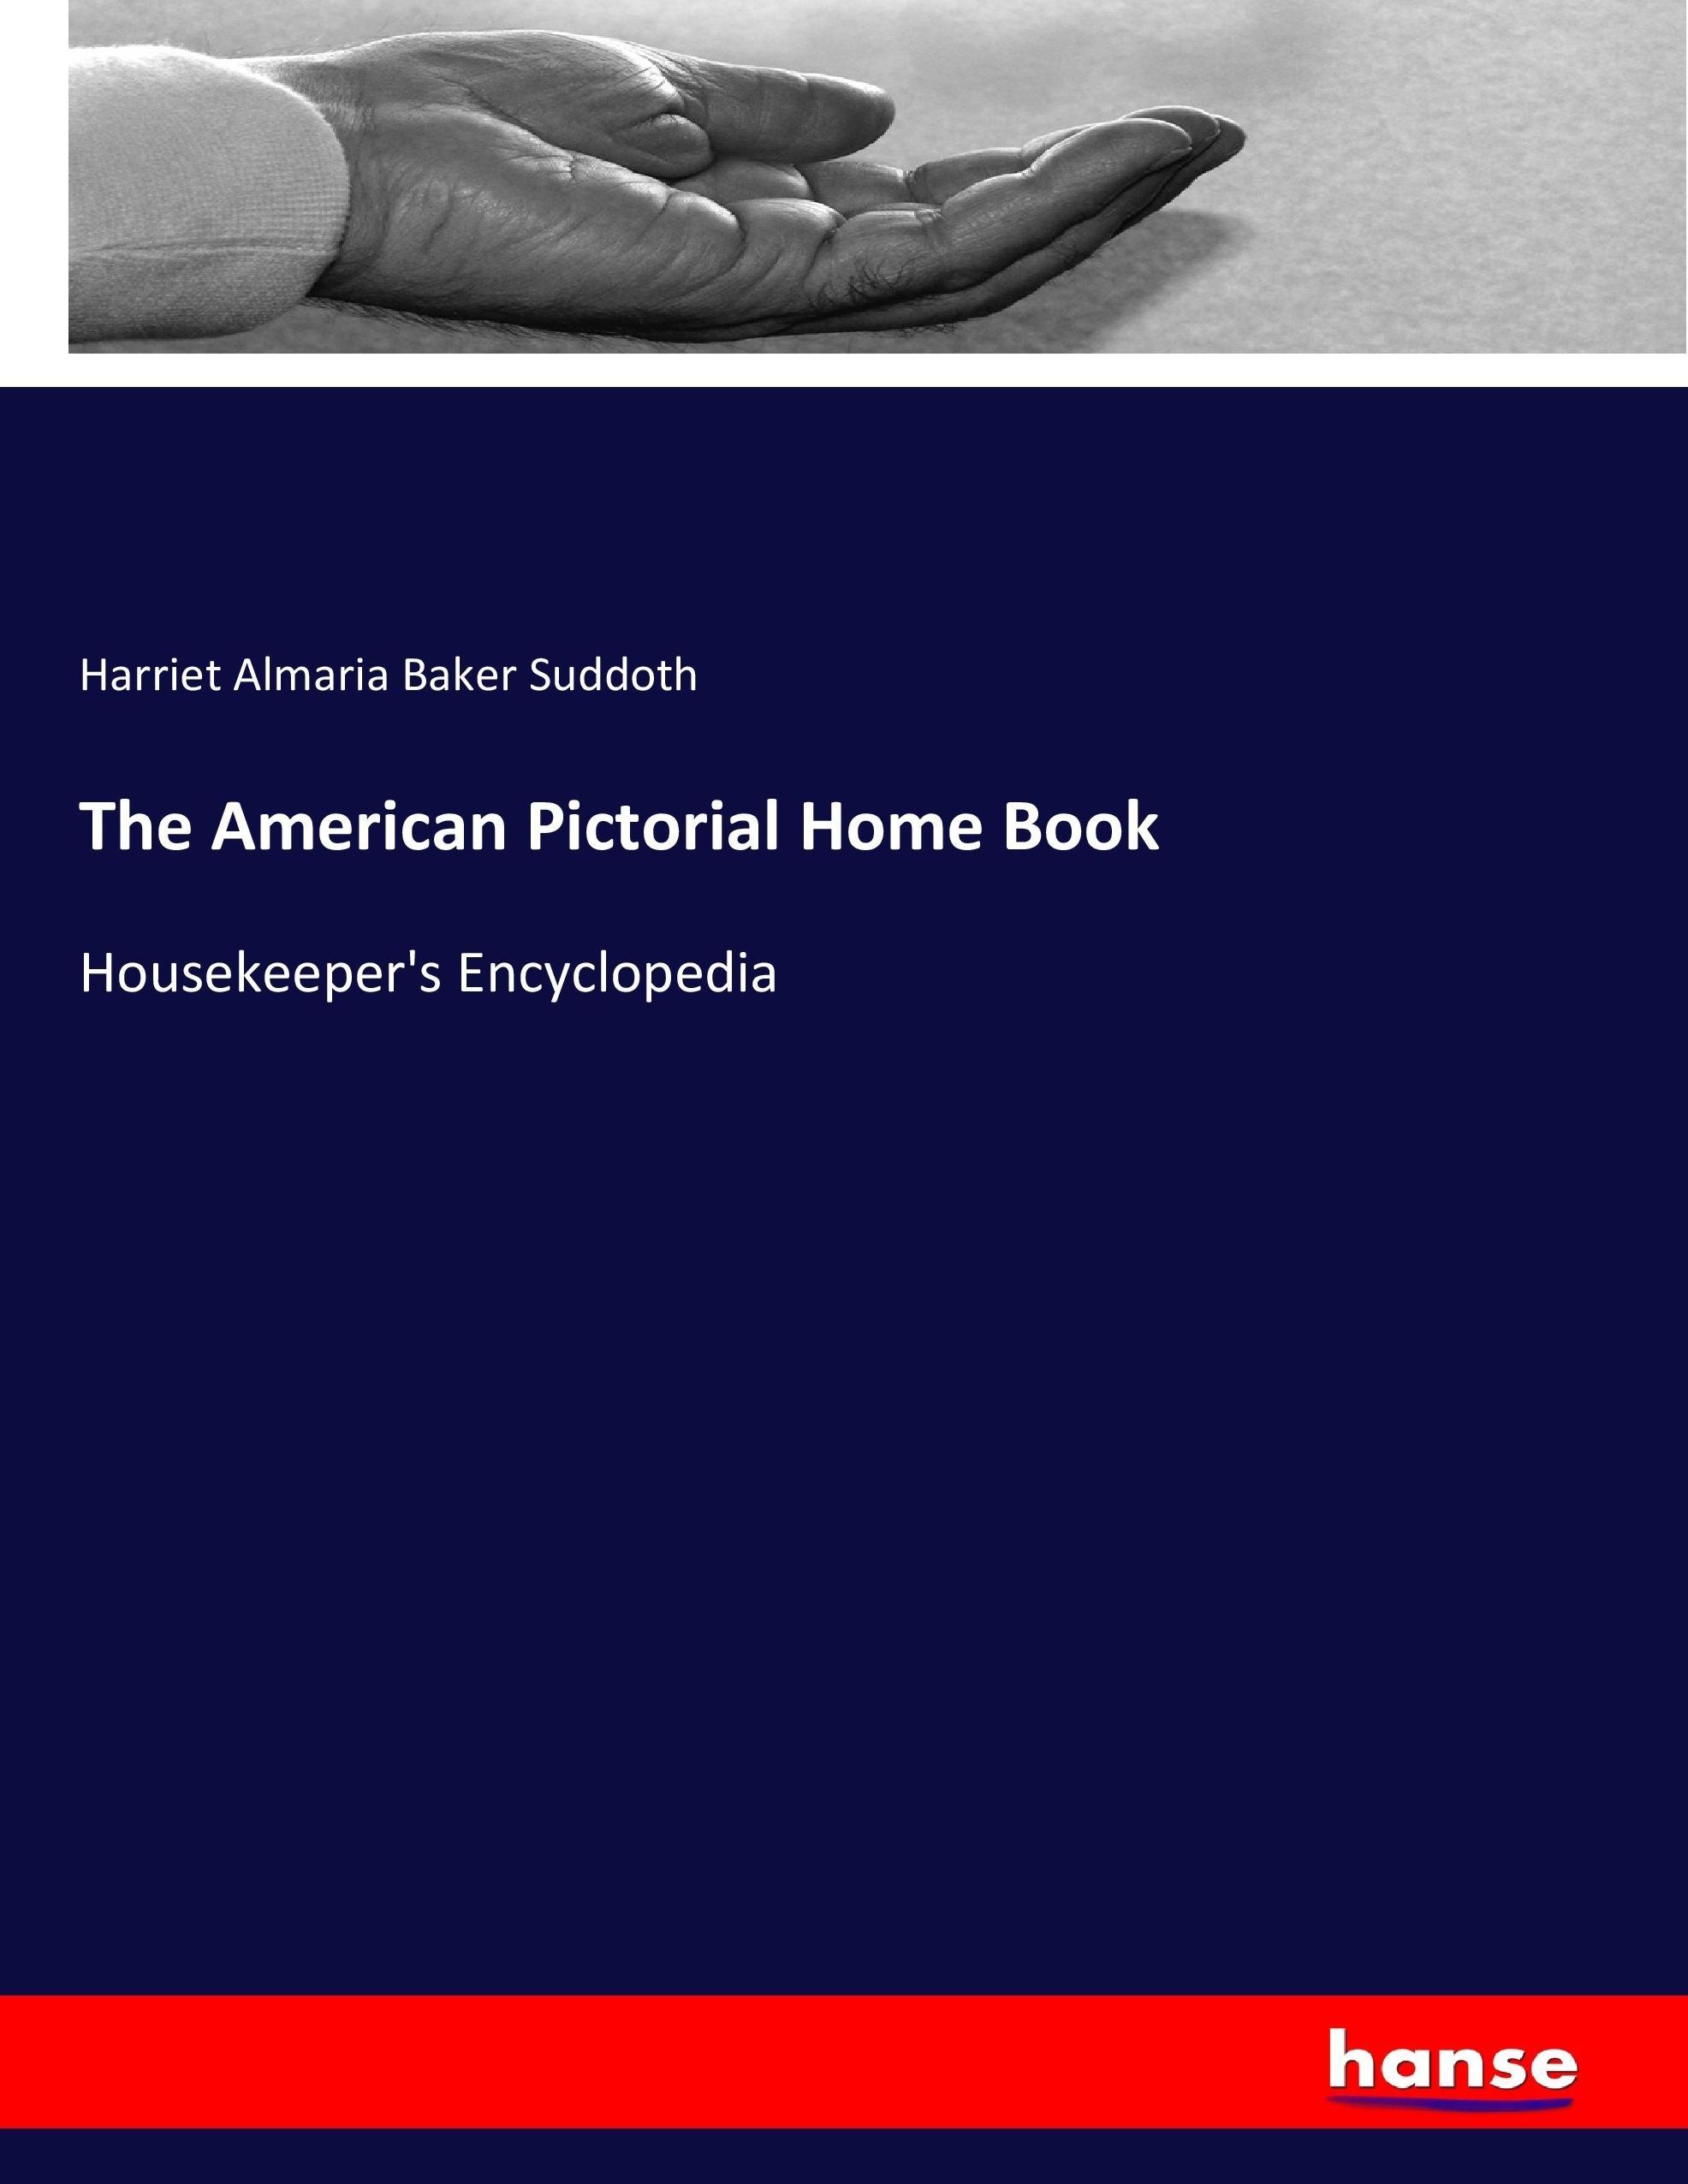 The American Pictorial Home Book